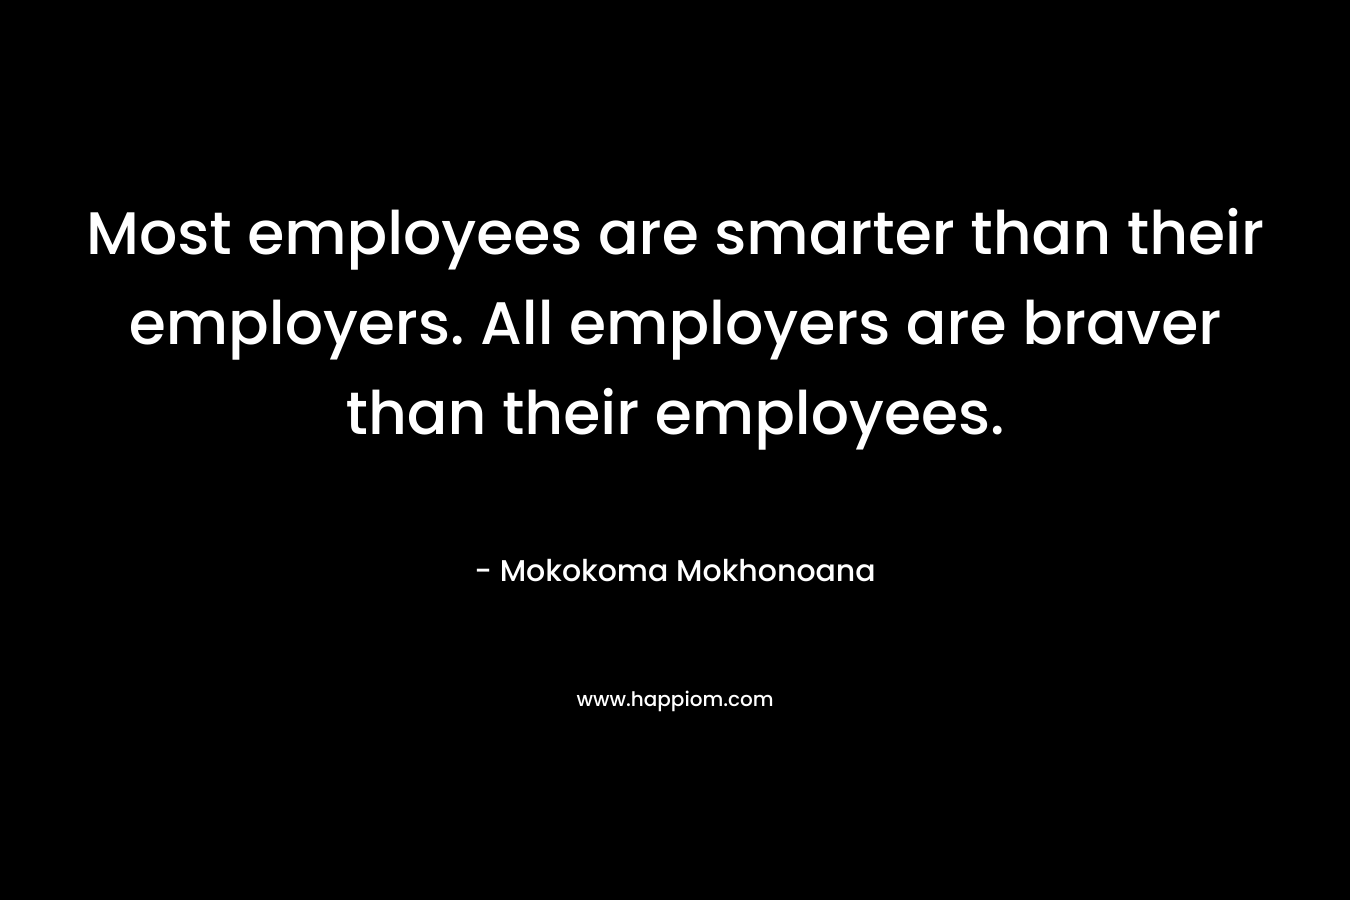 Most employees are smarter than their employers. All employers are braver than their employees.